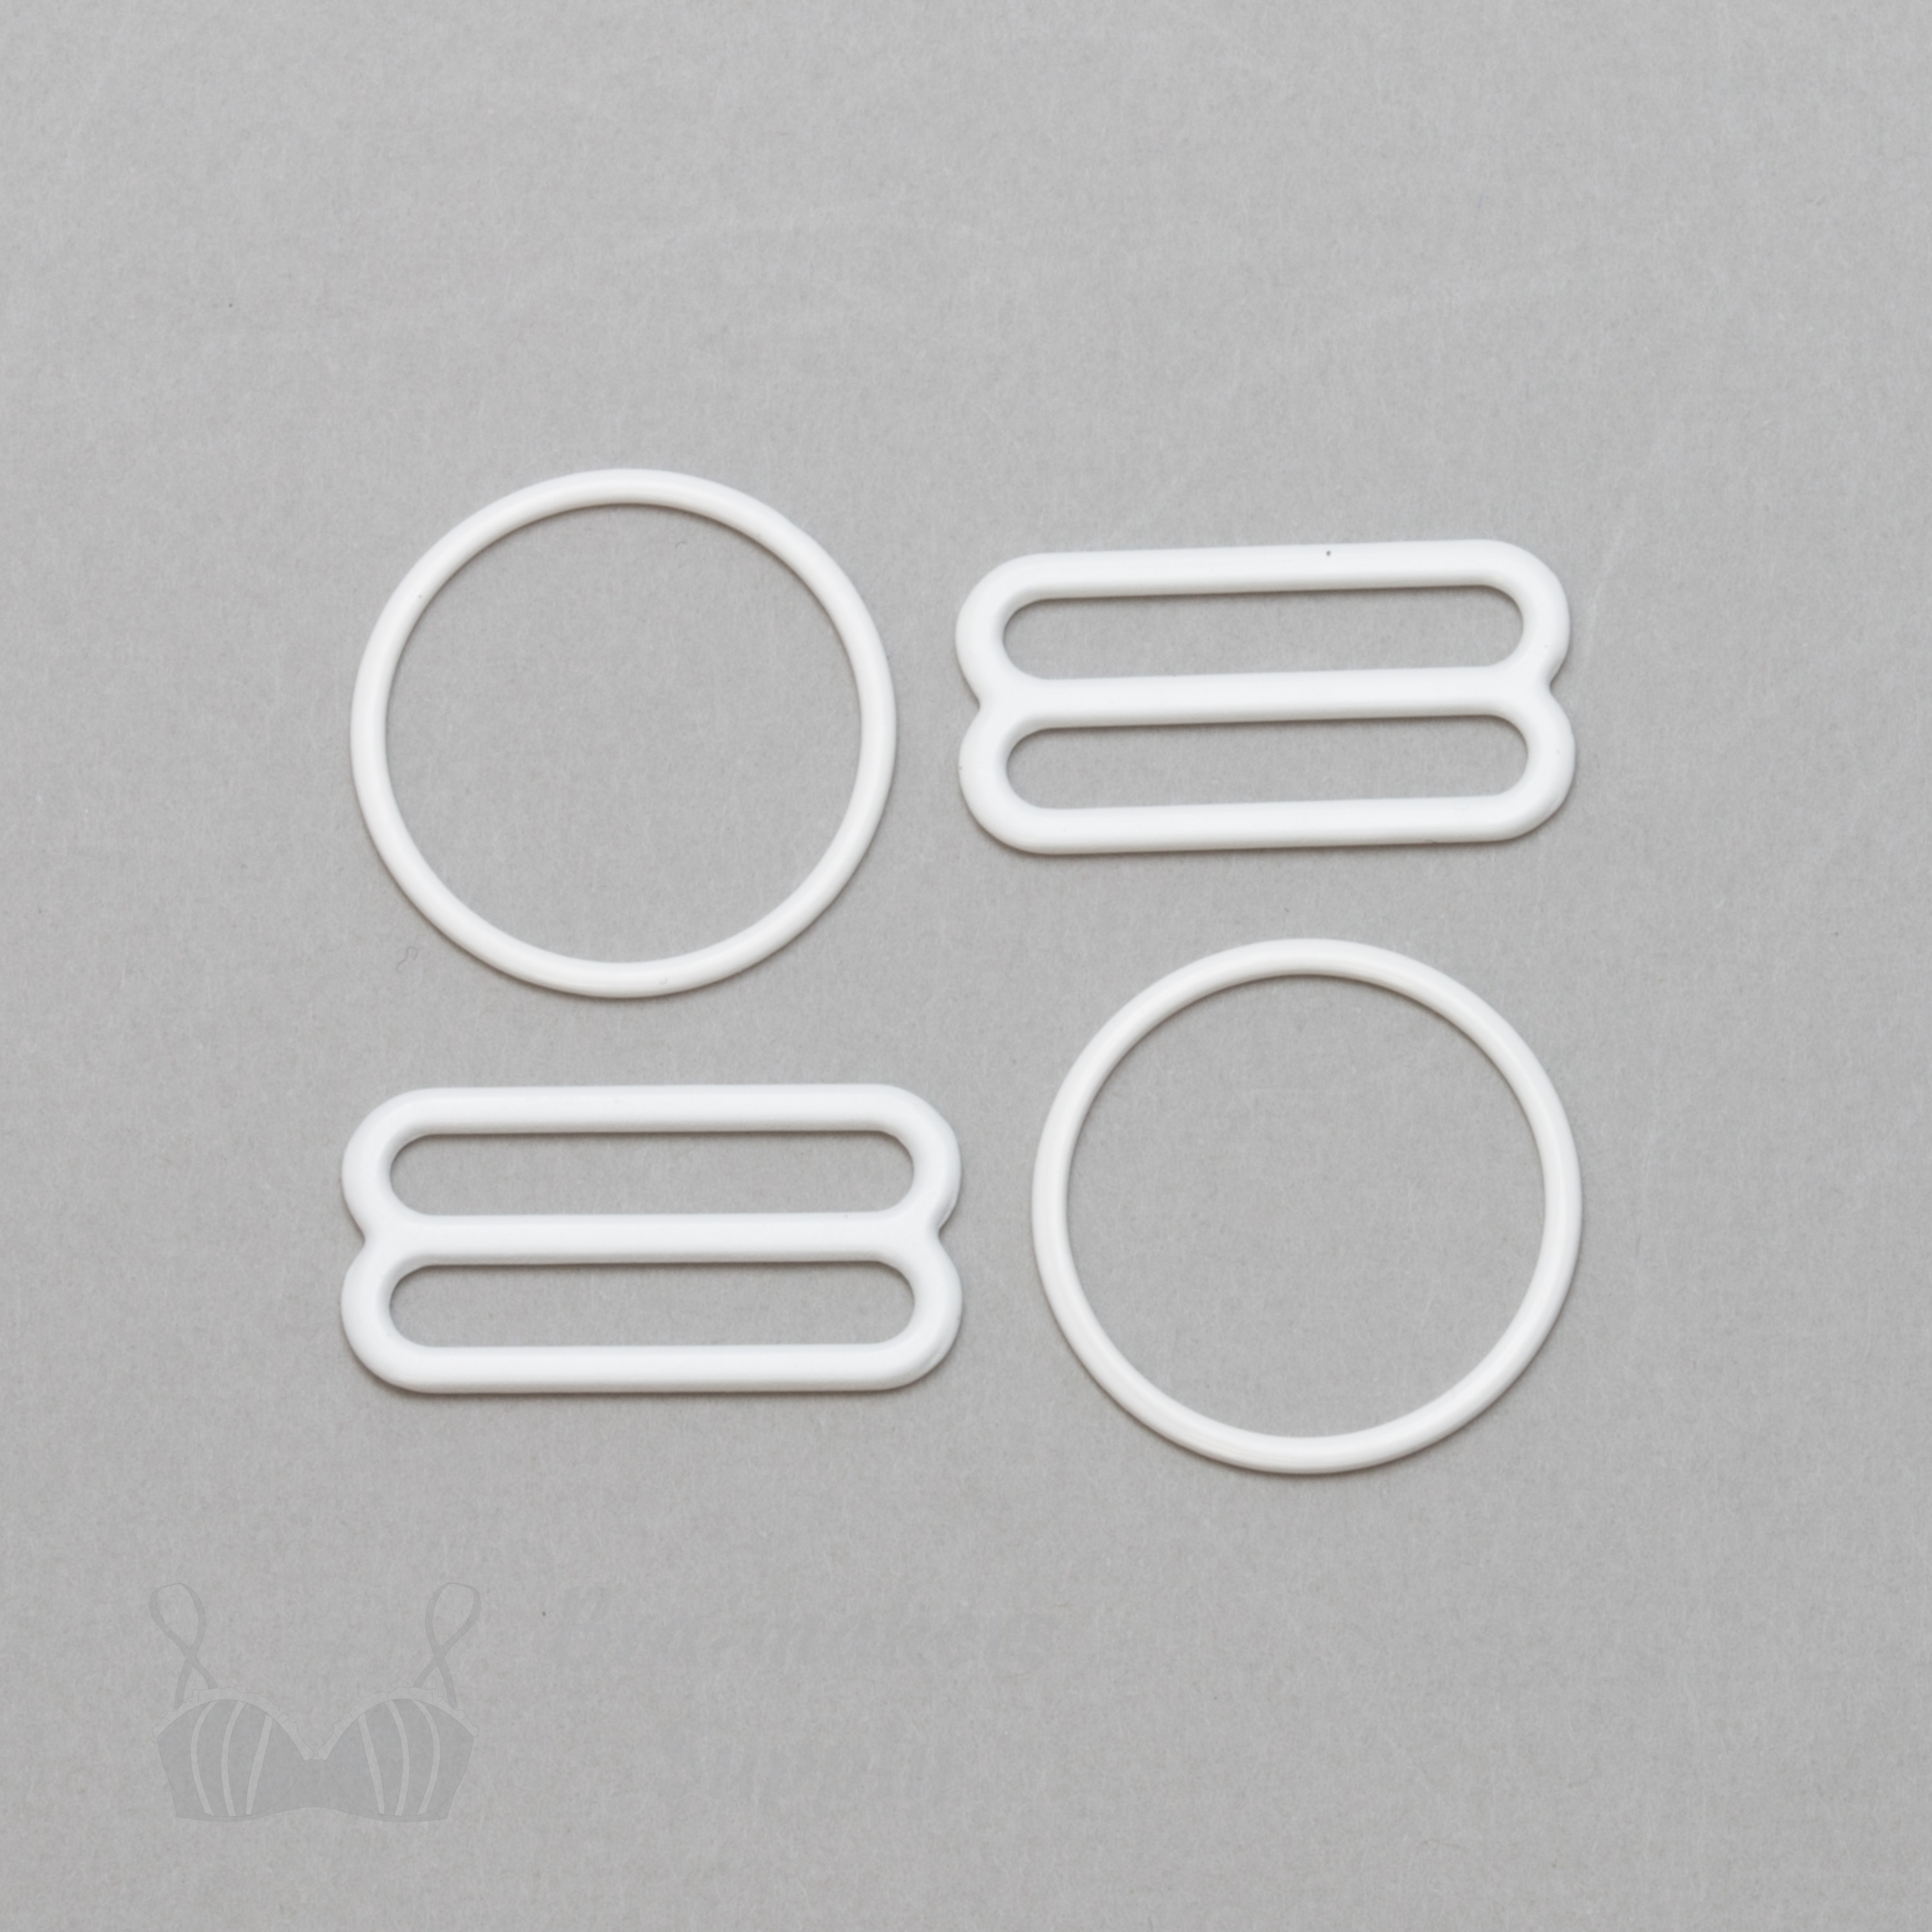 one inch 22mm RM-8 white nylon coated metal rings sliders or bright white Pantone 11-0601 from Bra-Makers Supply 2 sliders 2 rings shown